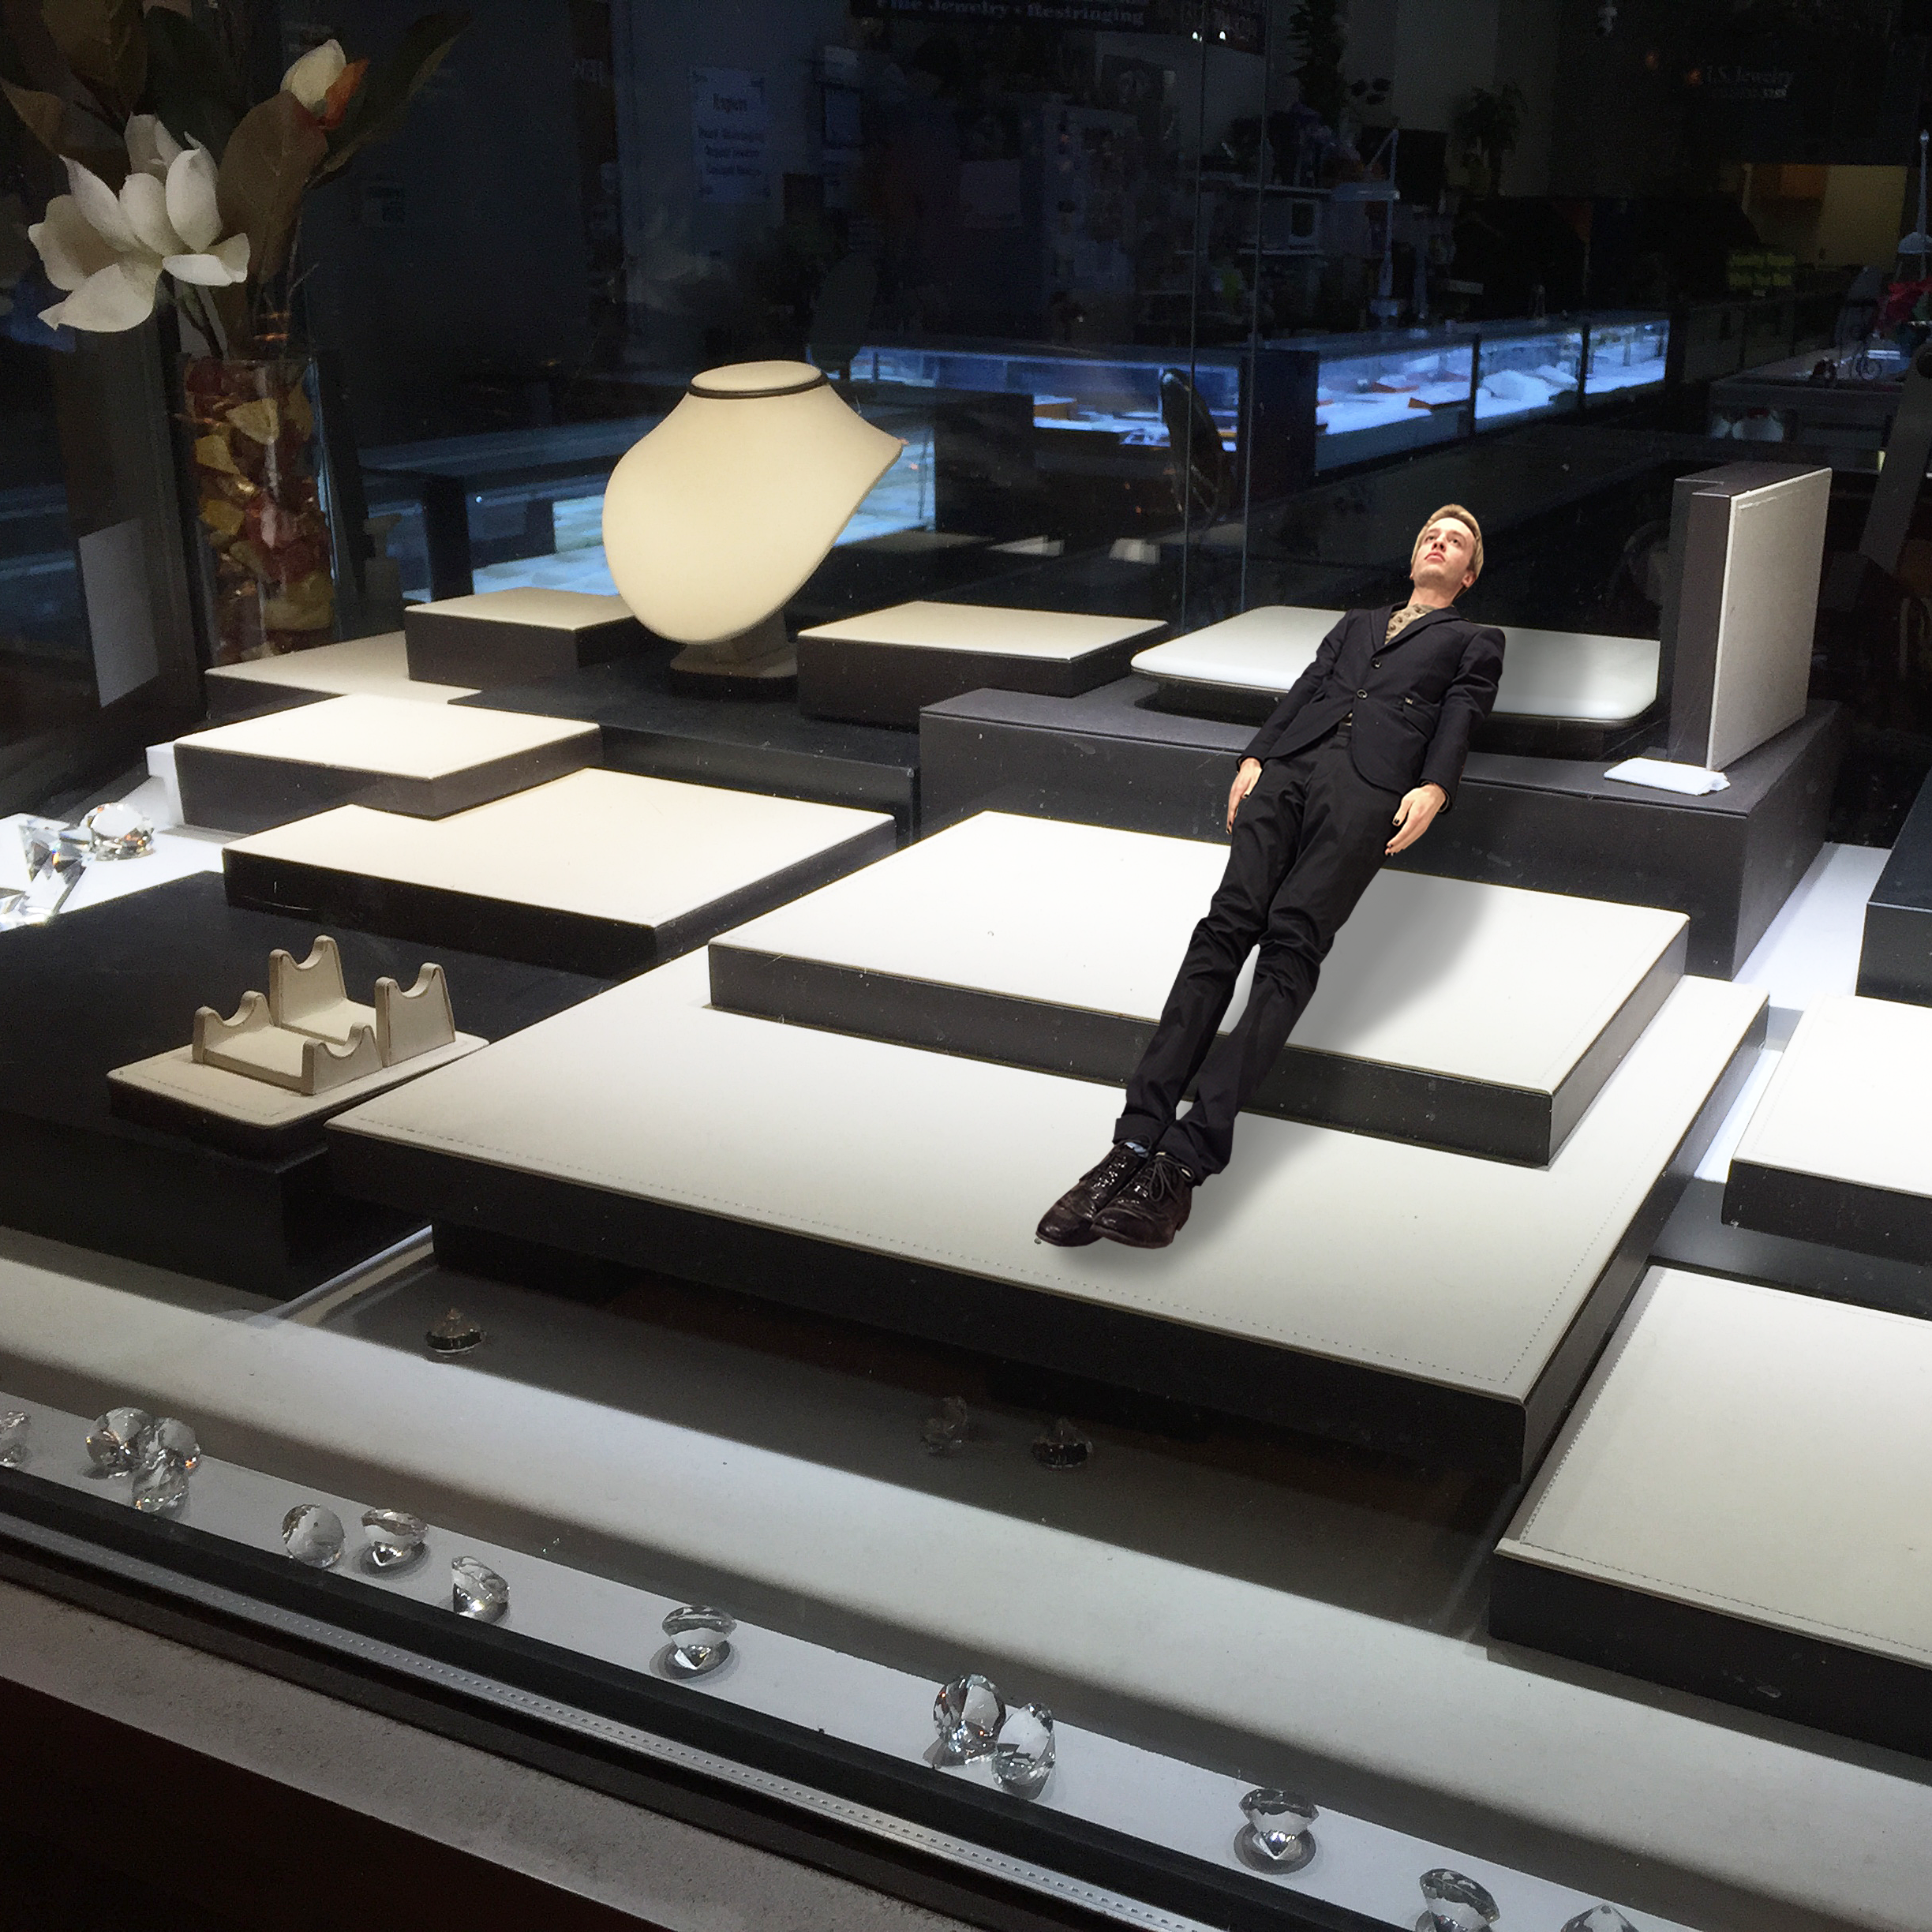 Butler's body floating over an empty jewlery display